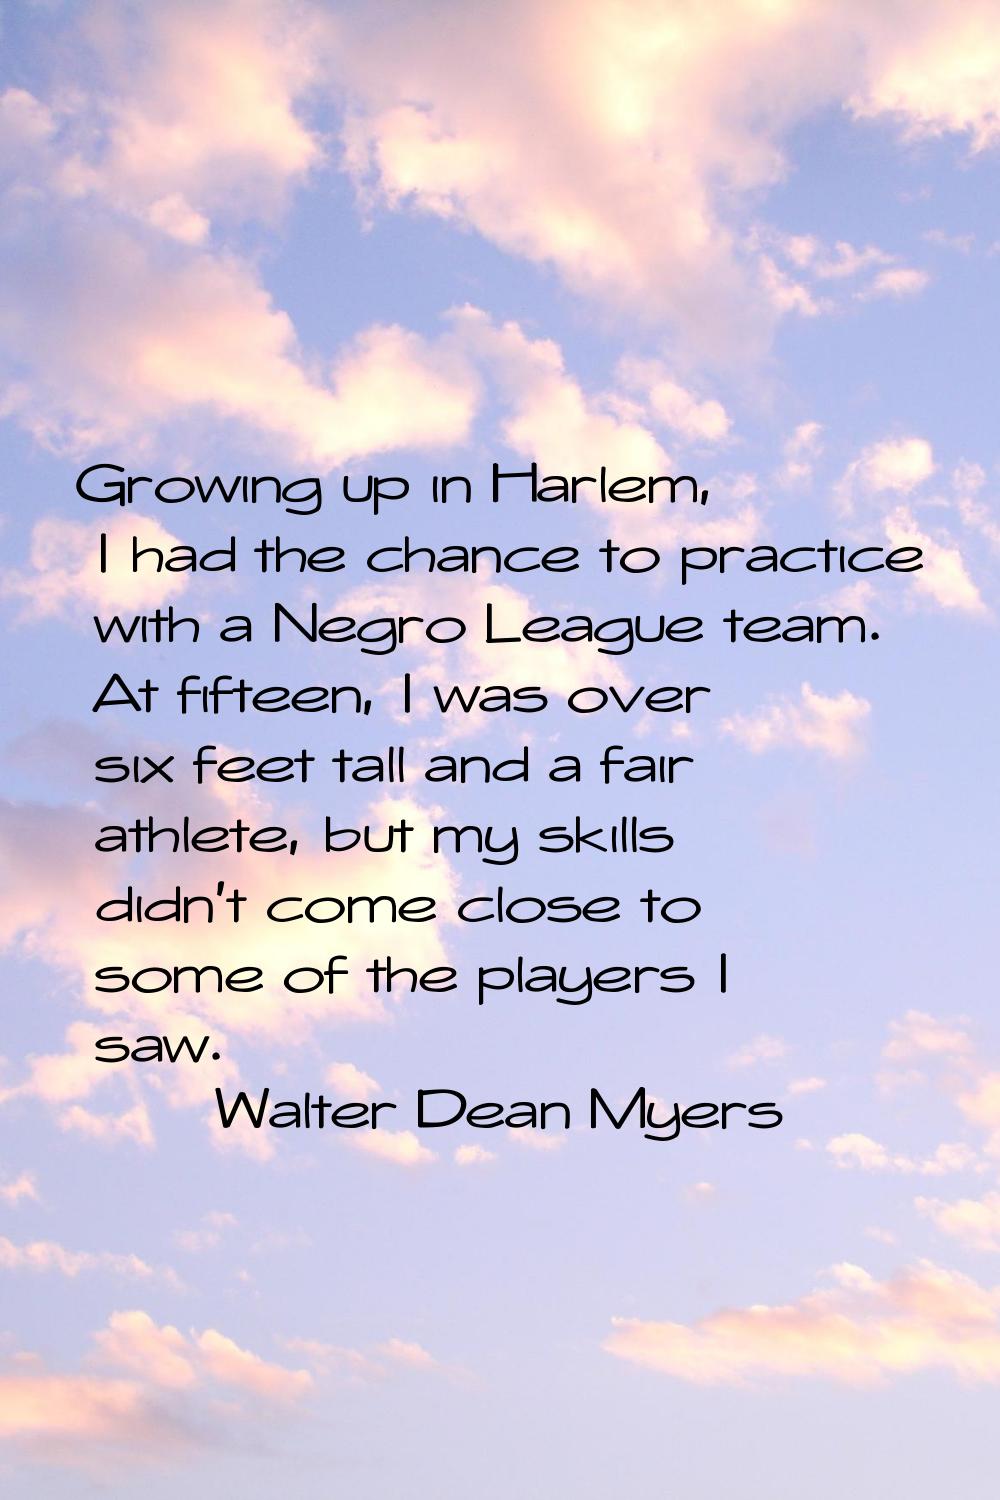 Growing up in Harlem, I had the chance to practice with a Negro League team. At fifteen, I was over